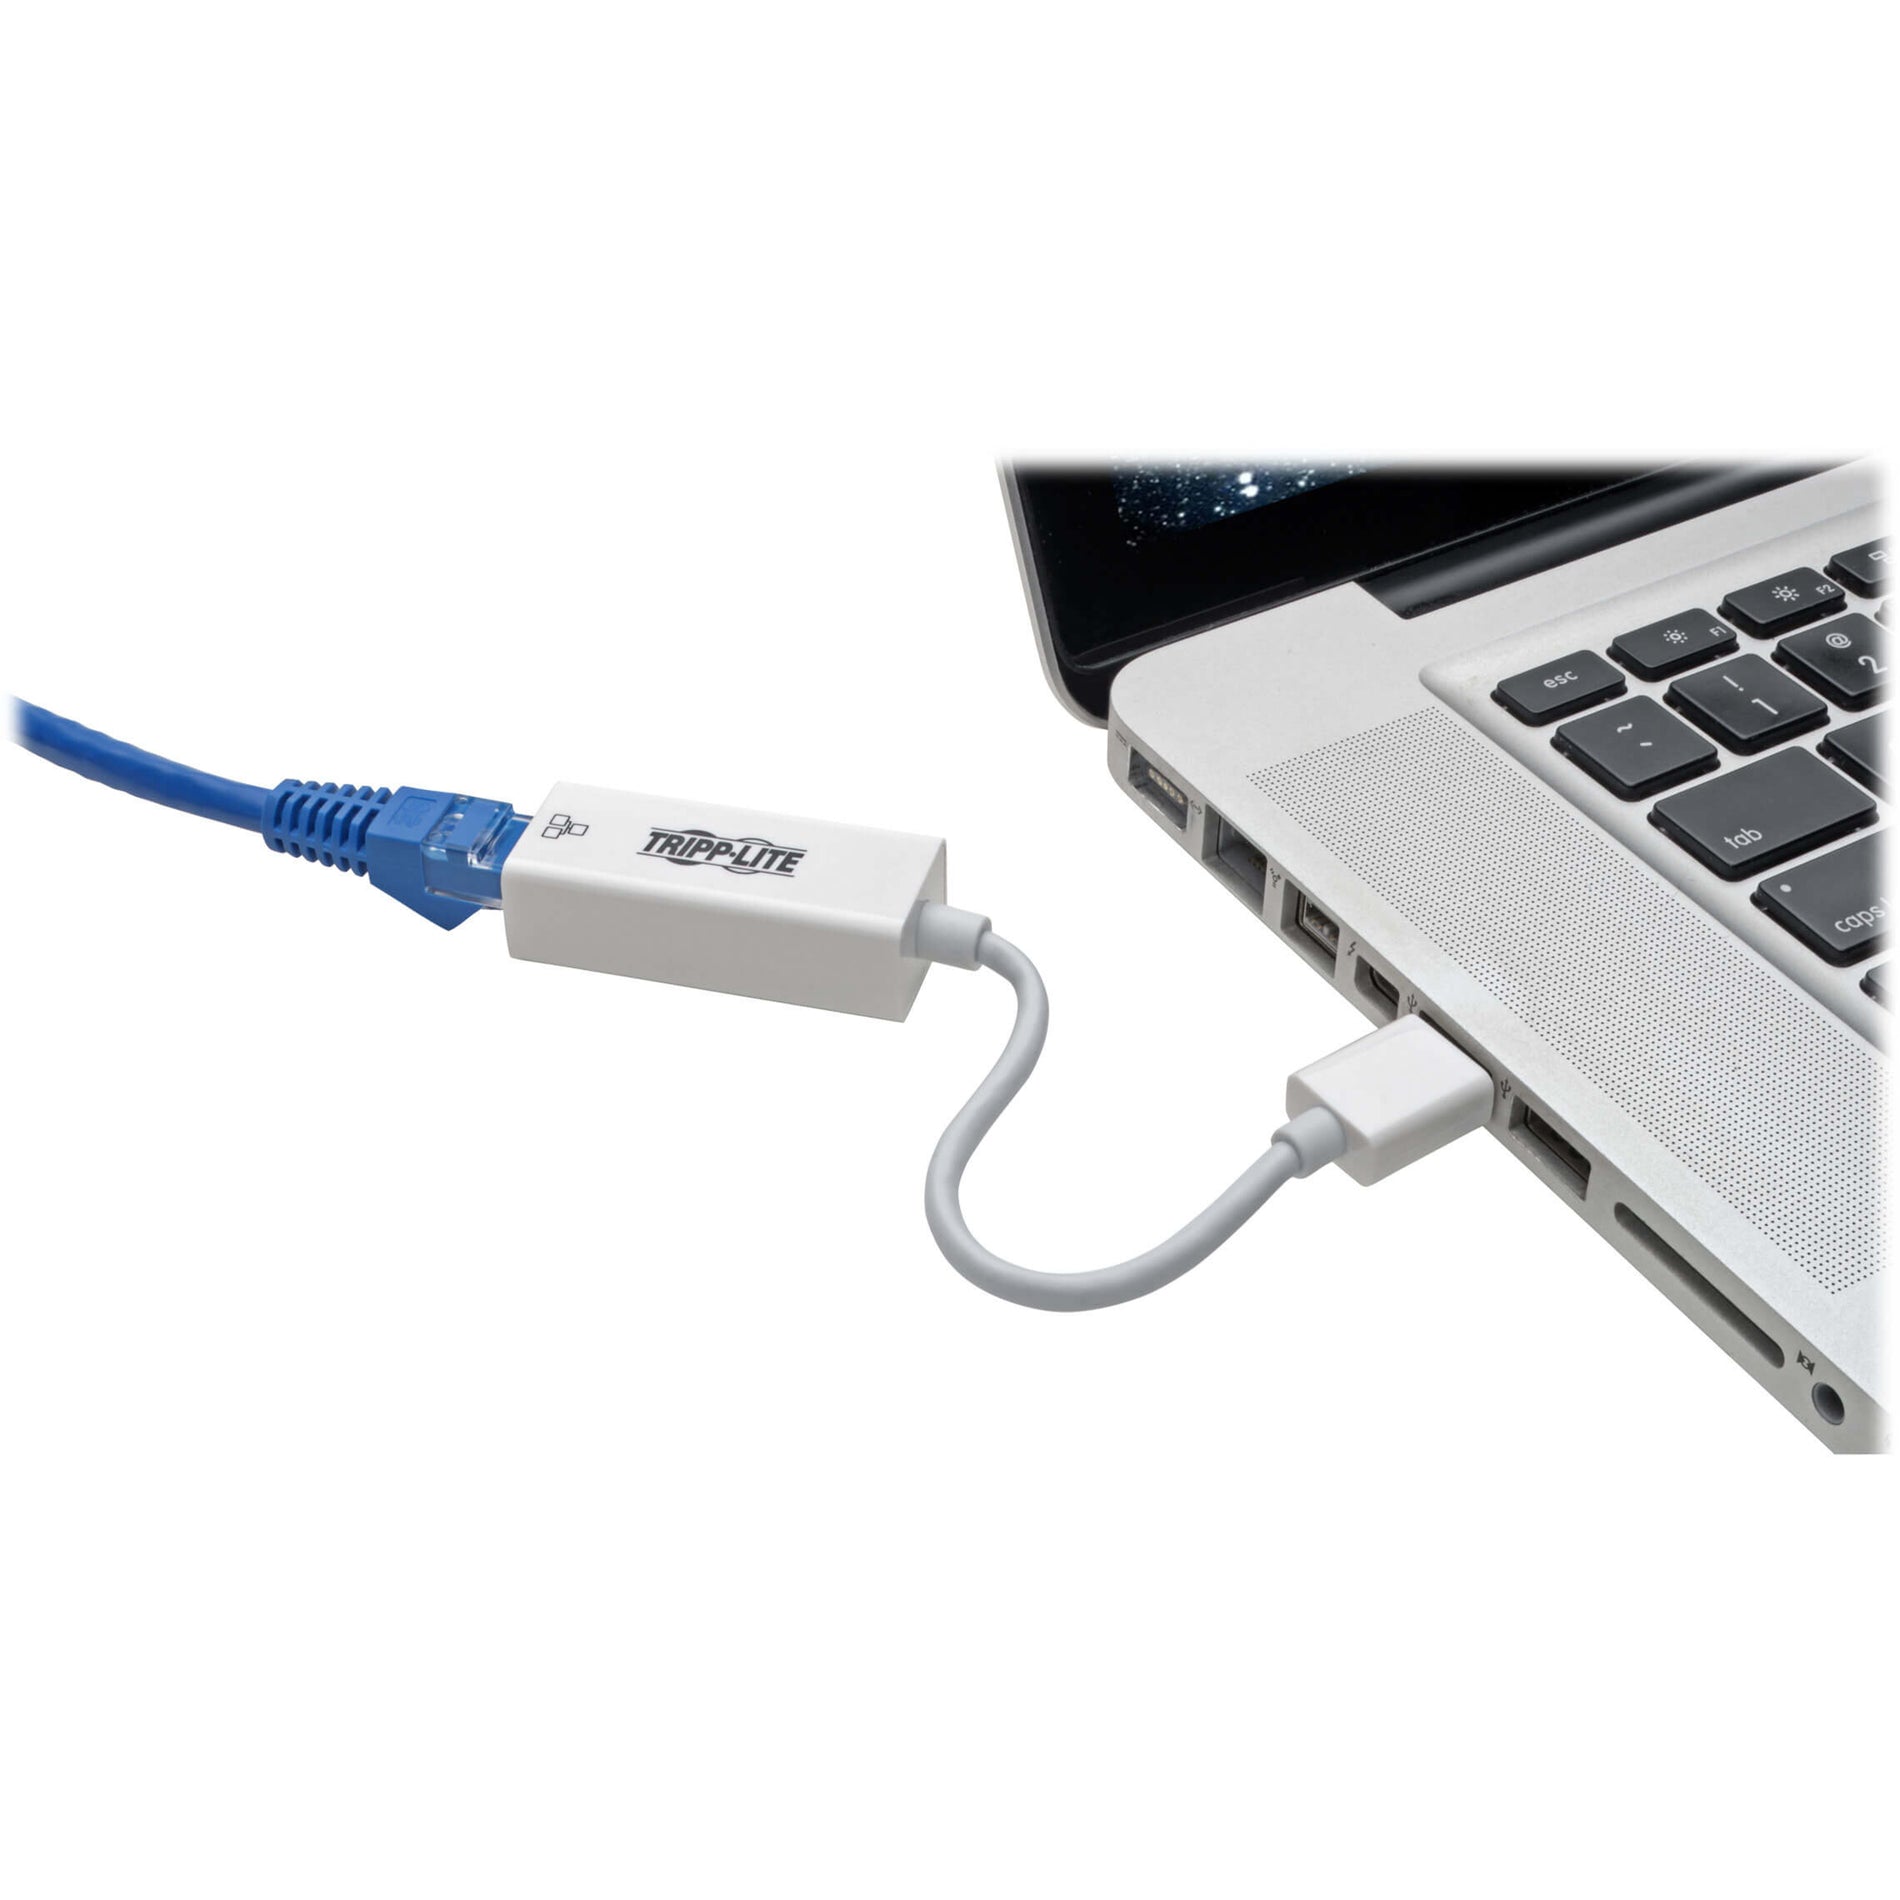 Tripp Lite U336-000-GBW USB 3.0 SuperSpeed to Gigabit Ethernet NIC Network Adapter, High-Speed Internet Connection for Your Computer